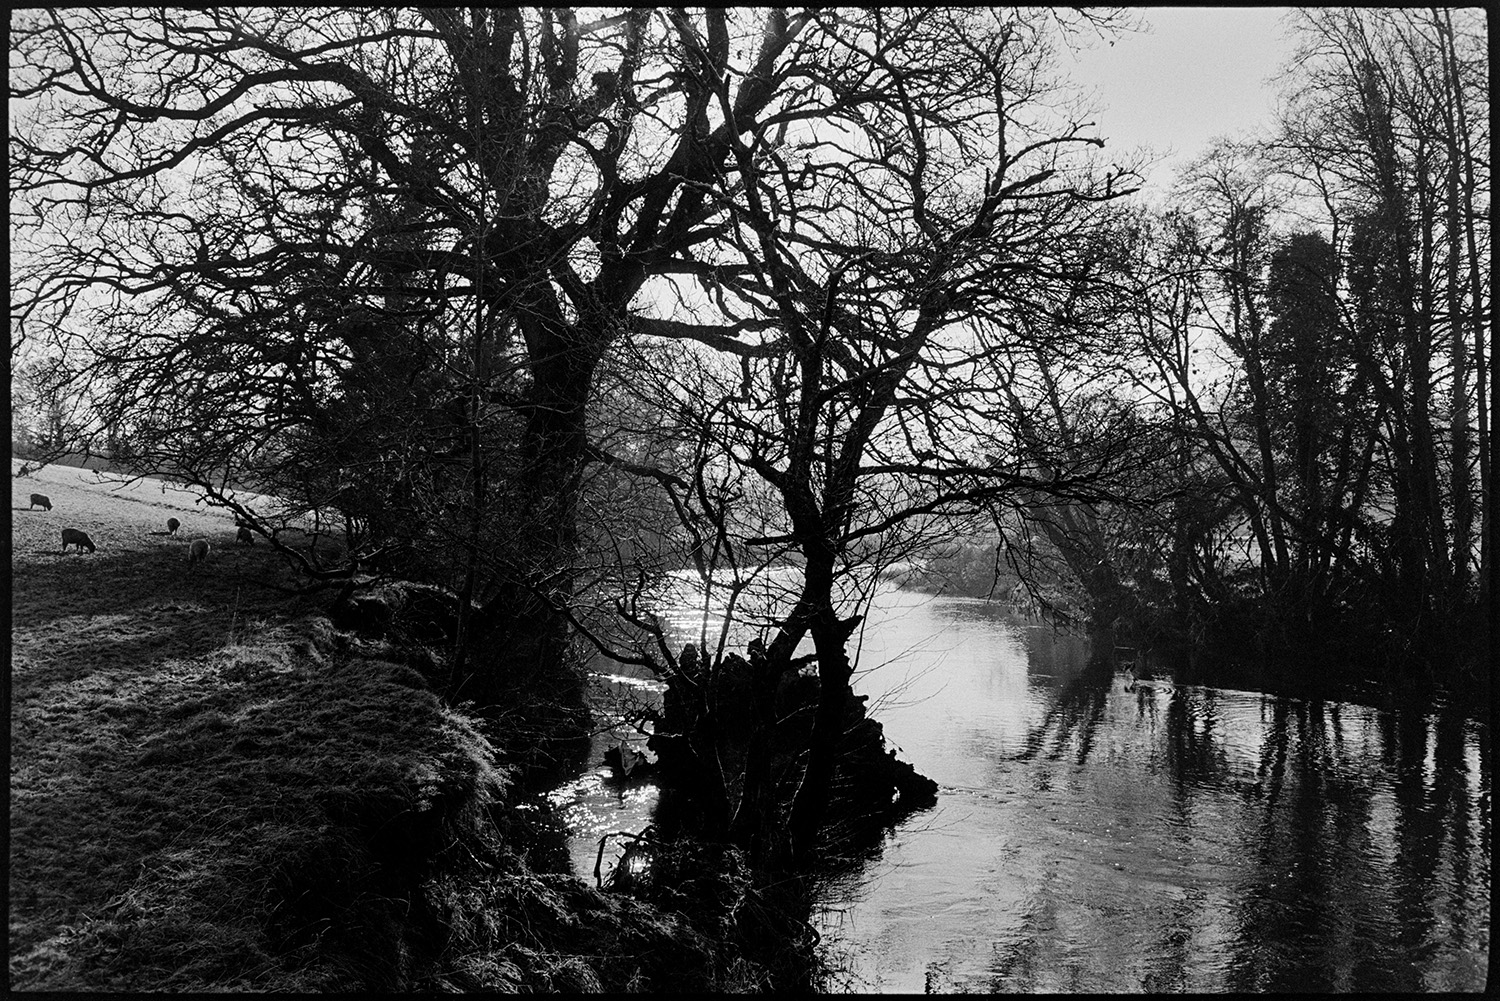 Trees at the edge of the river. 
[Trees on the bank of the River Torridge at Lower Langham, Dolton. Sheep are grazing in the field next to the river.]